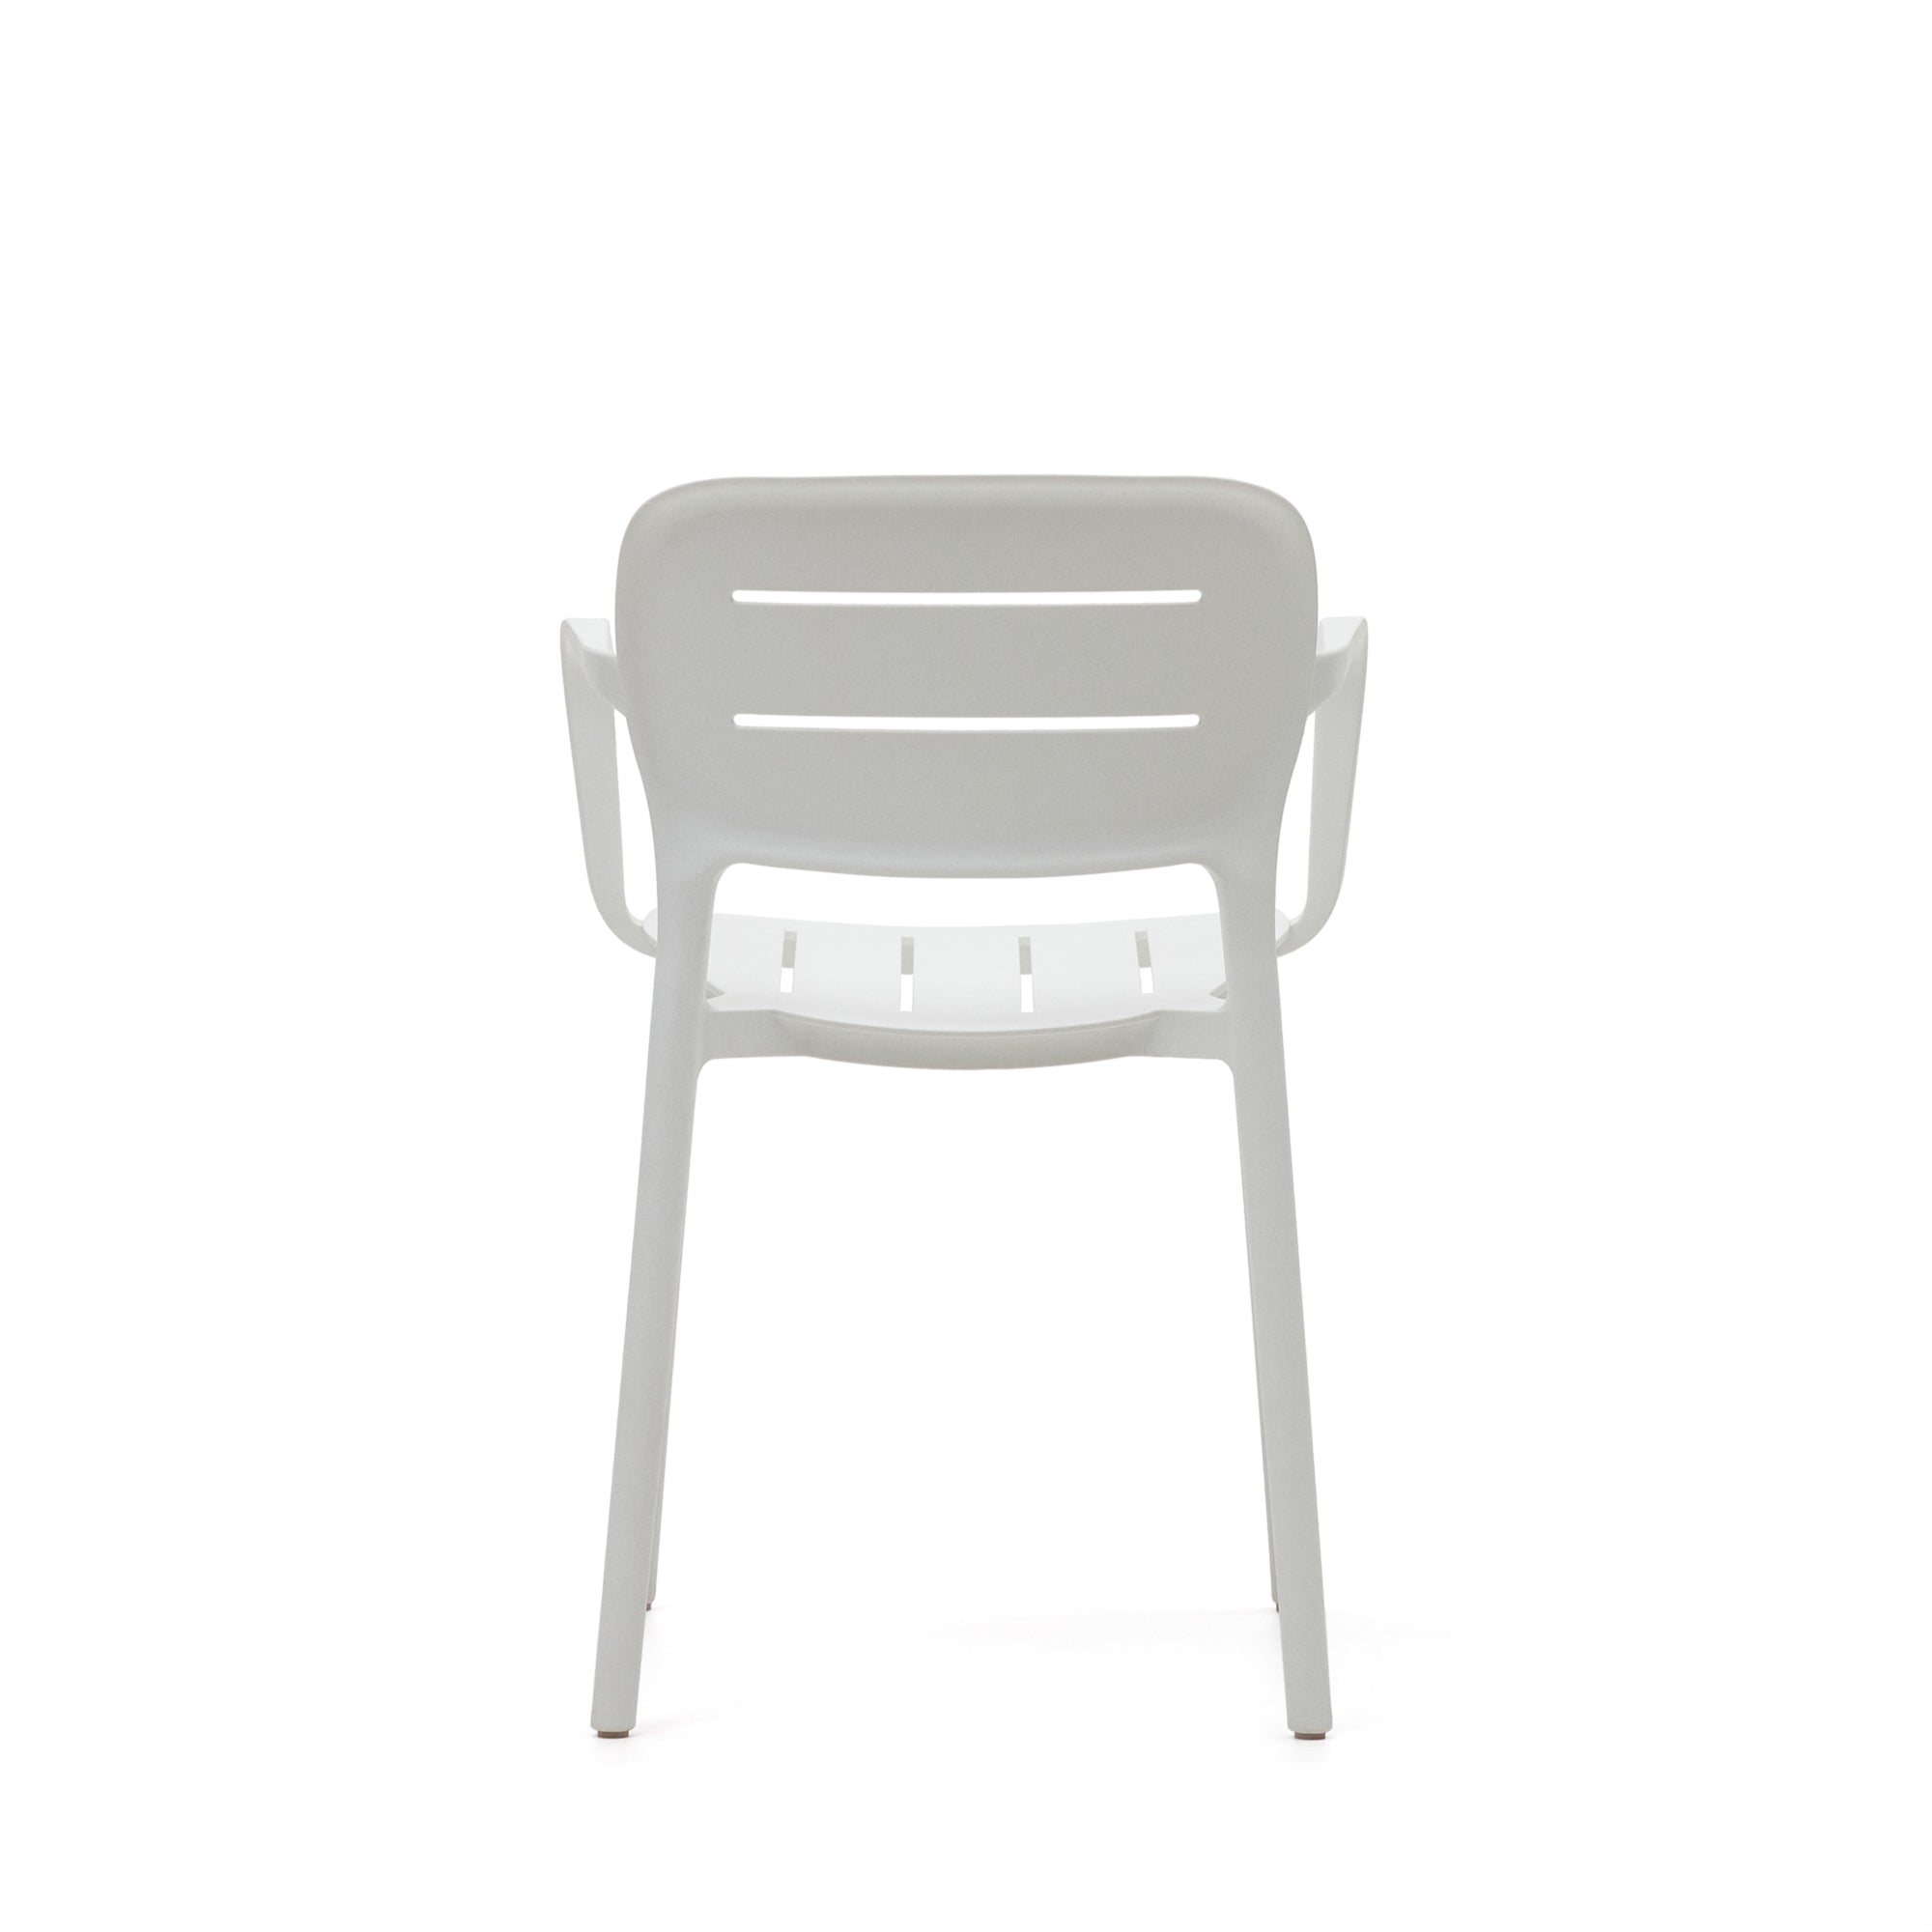 Morella stackable outdoor chair in white